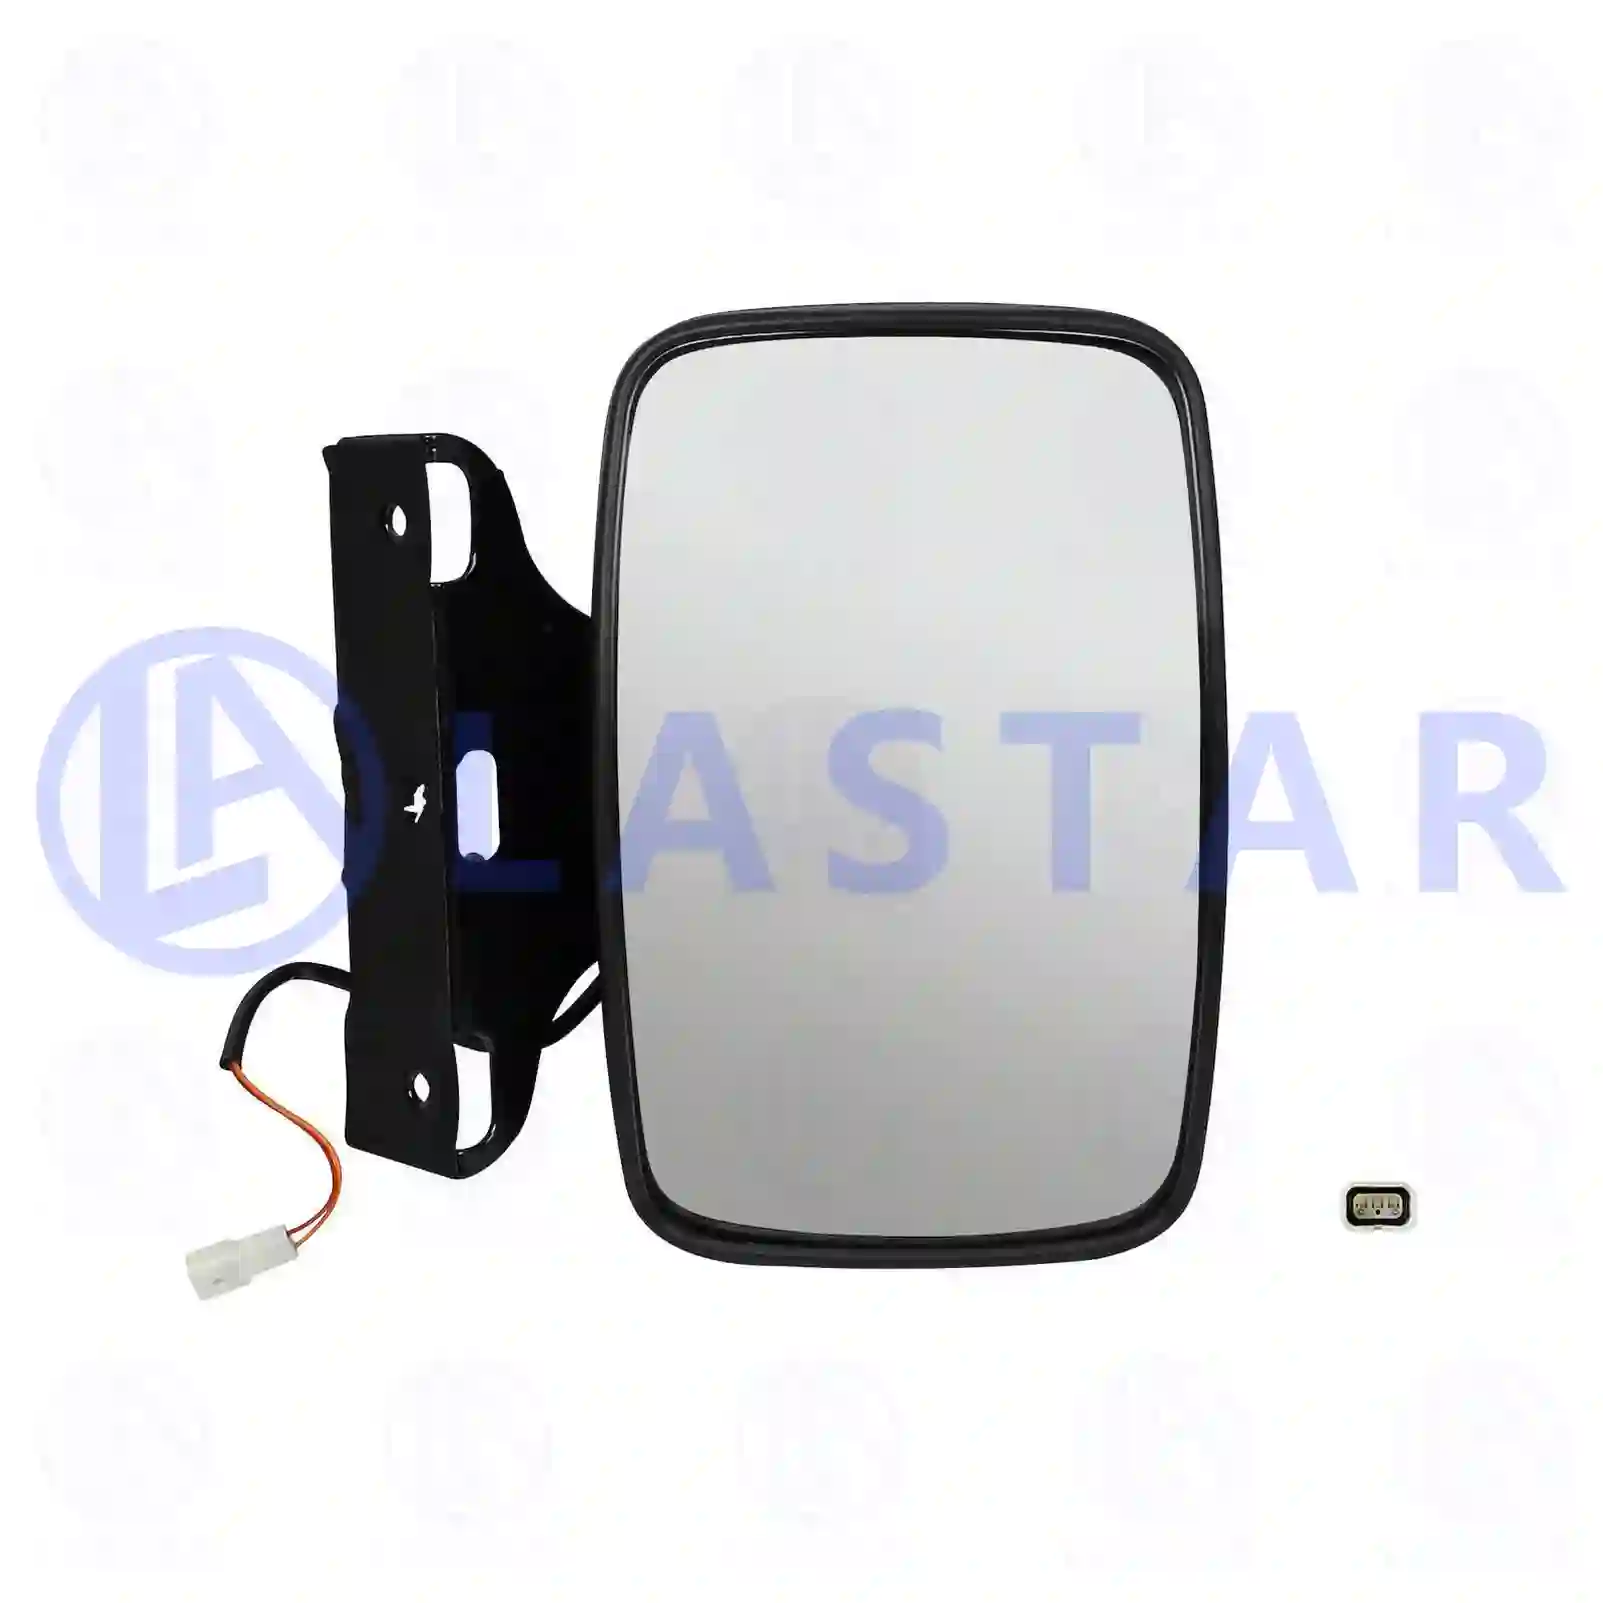 Kerb observation mirror, heated, 77720850, 504168236, 580176 ||  77720850 Lastar Spare Part | Truck Spare Parts, Auotomotive Spare Parts Kerb observation mirror, heated, 77720850, 504168236, 580176 ||  77720850 Lastar Spare Part | Truck Spare Parts, Auotomotive Spare Parts